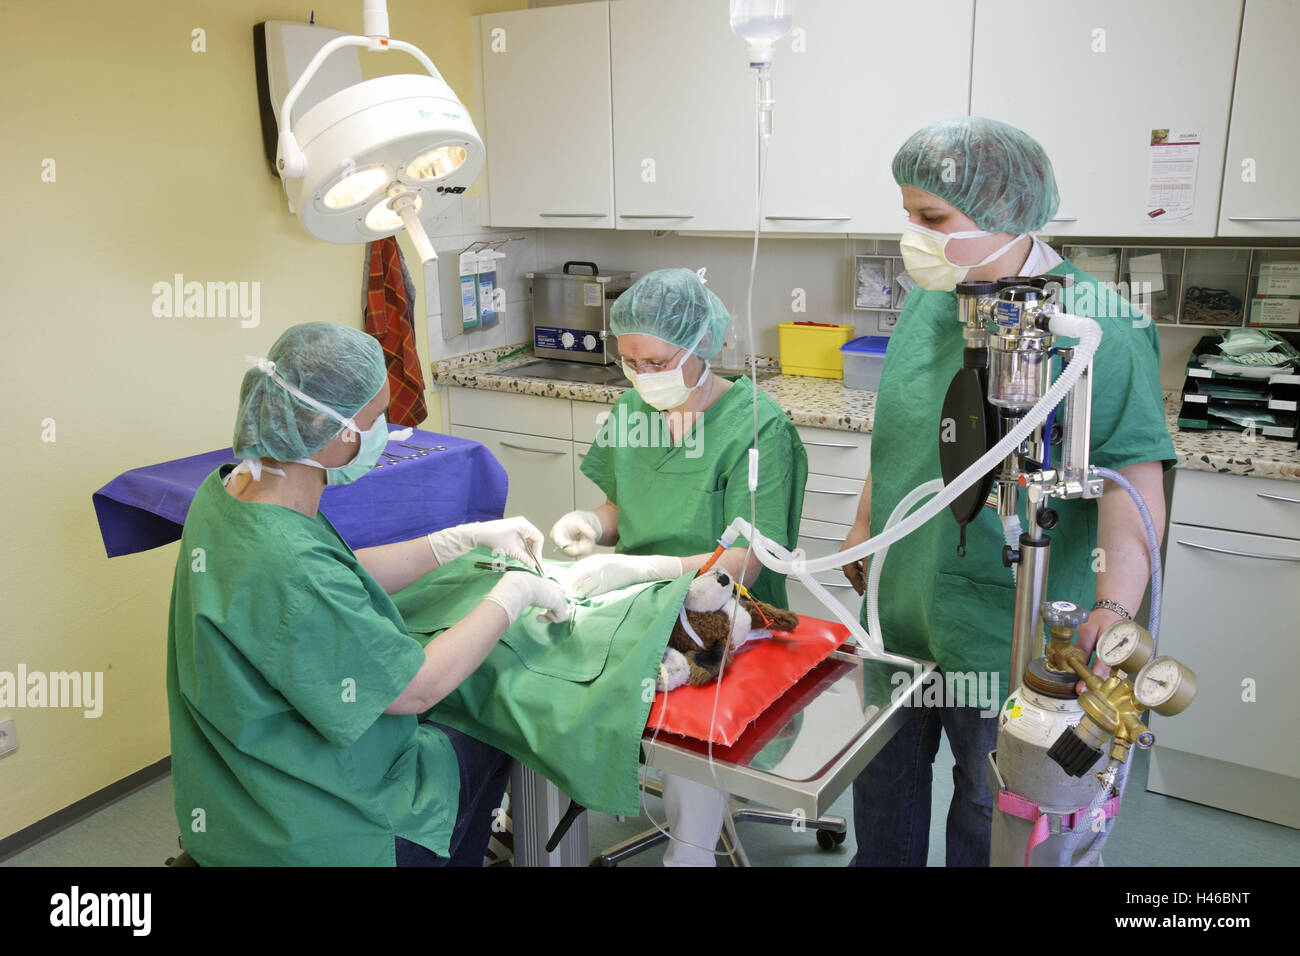 Veterinarian, operation, op. hall, operating theatre, practise,  veterinarian's practise, veterinarian, animal, animal medicine, treatment,  healing, care, health, disease, examination, diagnostic, concentration, dog,  soft toy, soft animal, person, team ...